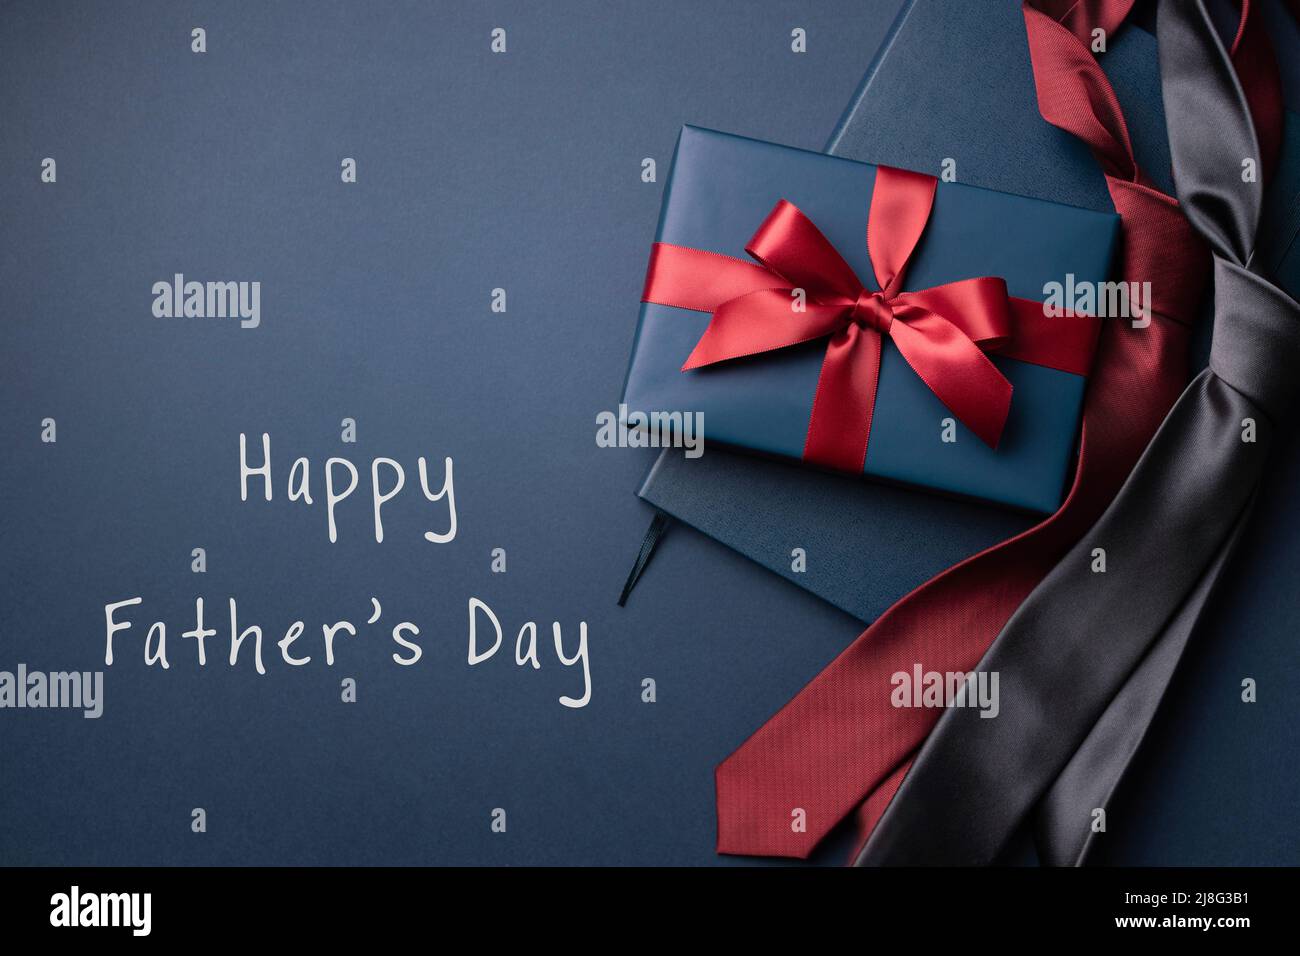 Happy Father's Day card with blue gift box, notebook and neckties on dark blue background. Stock Photo